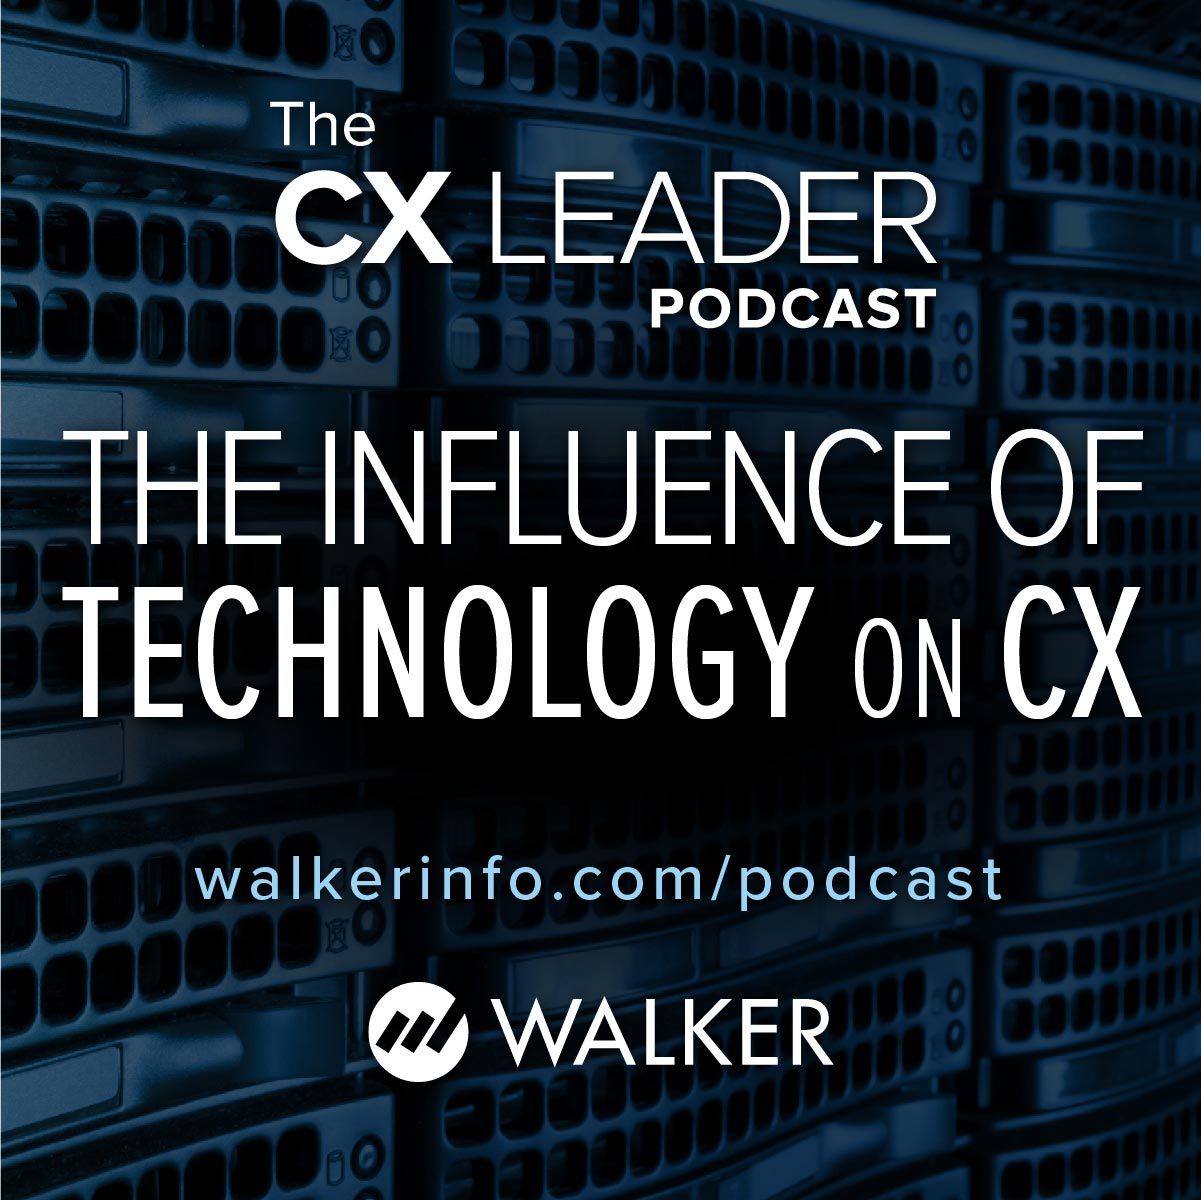 The Influence of Technology on CX